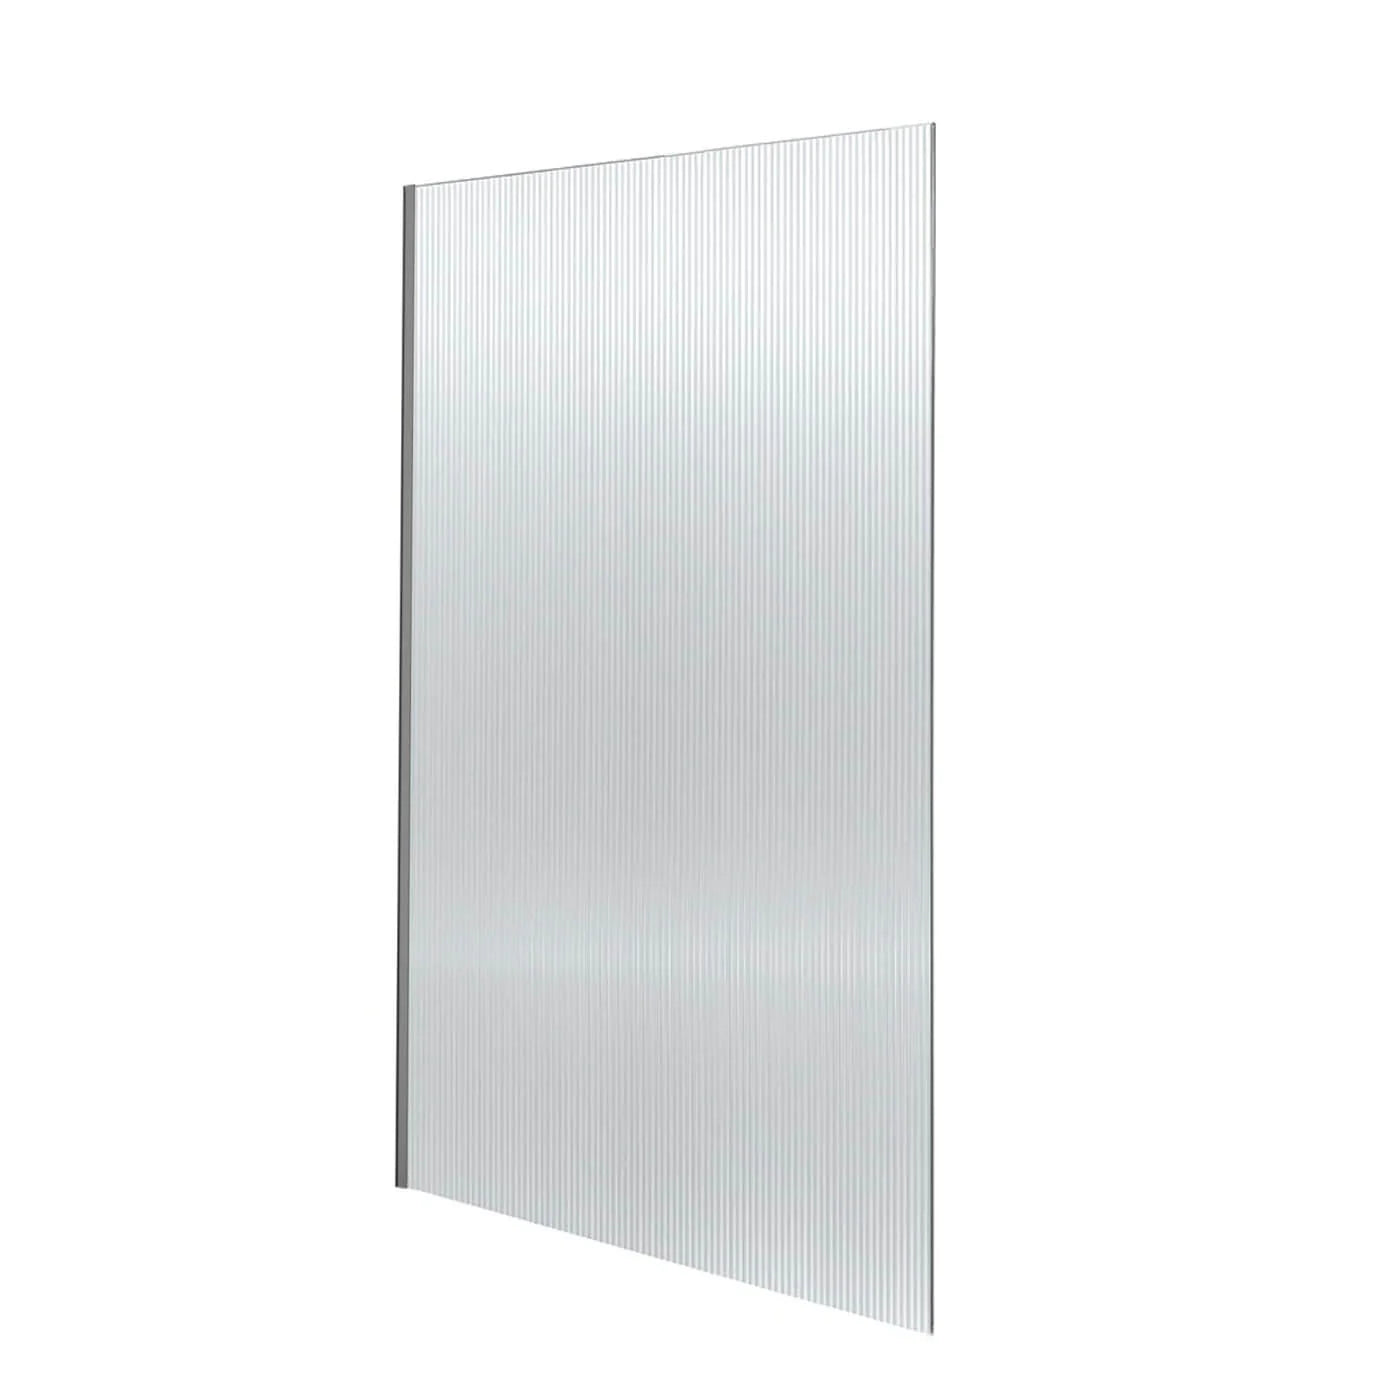 Granlusso 8mm Toughened Glass Shower Screen Panel Fluted Fixed Gunmetal Grey